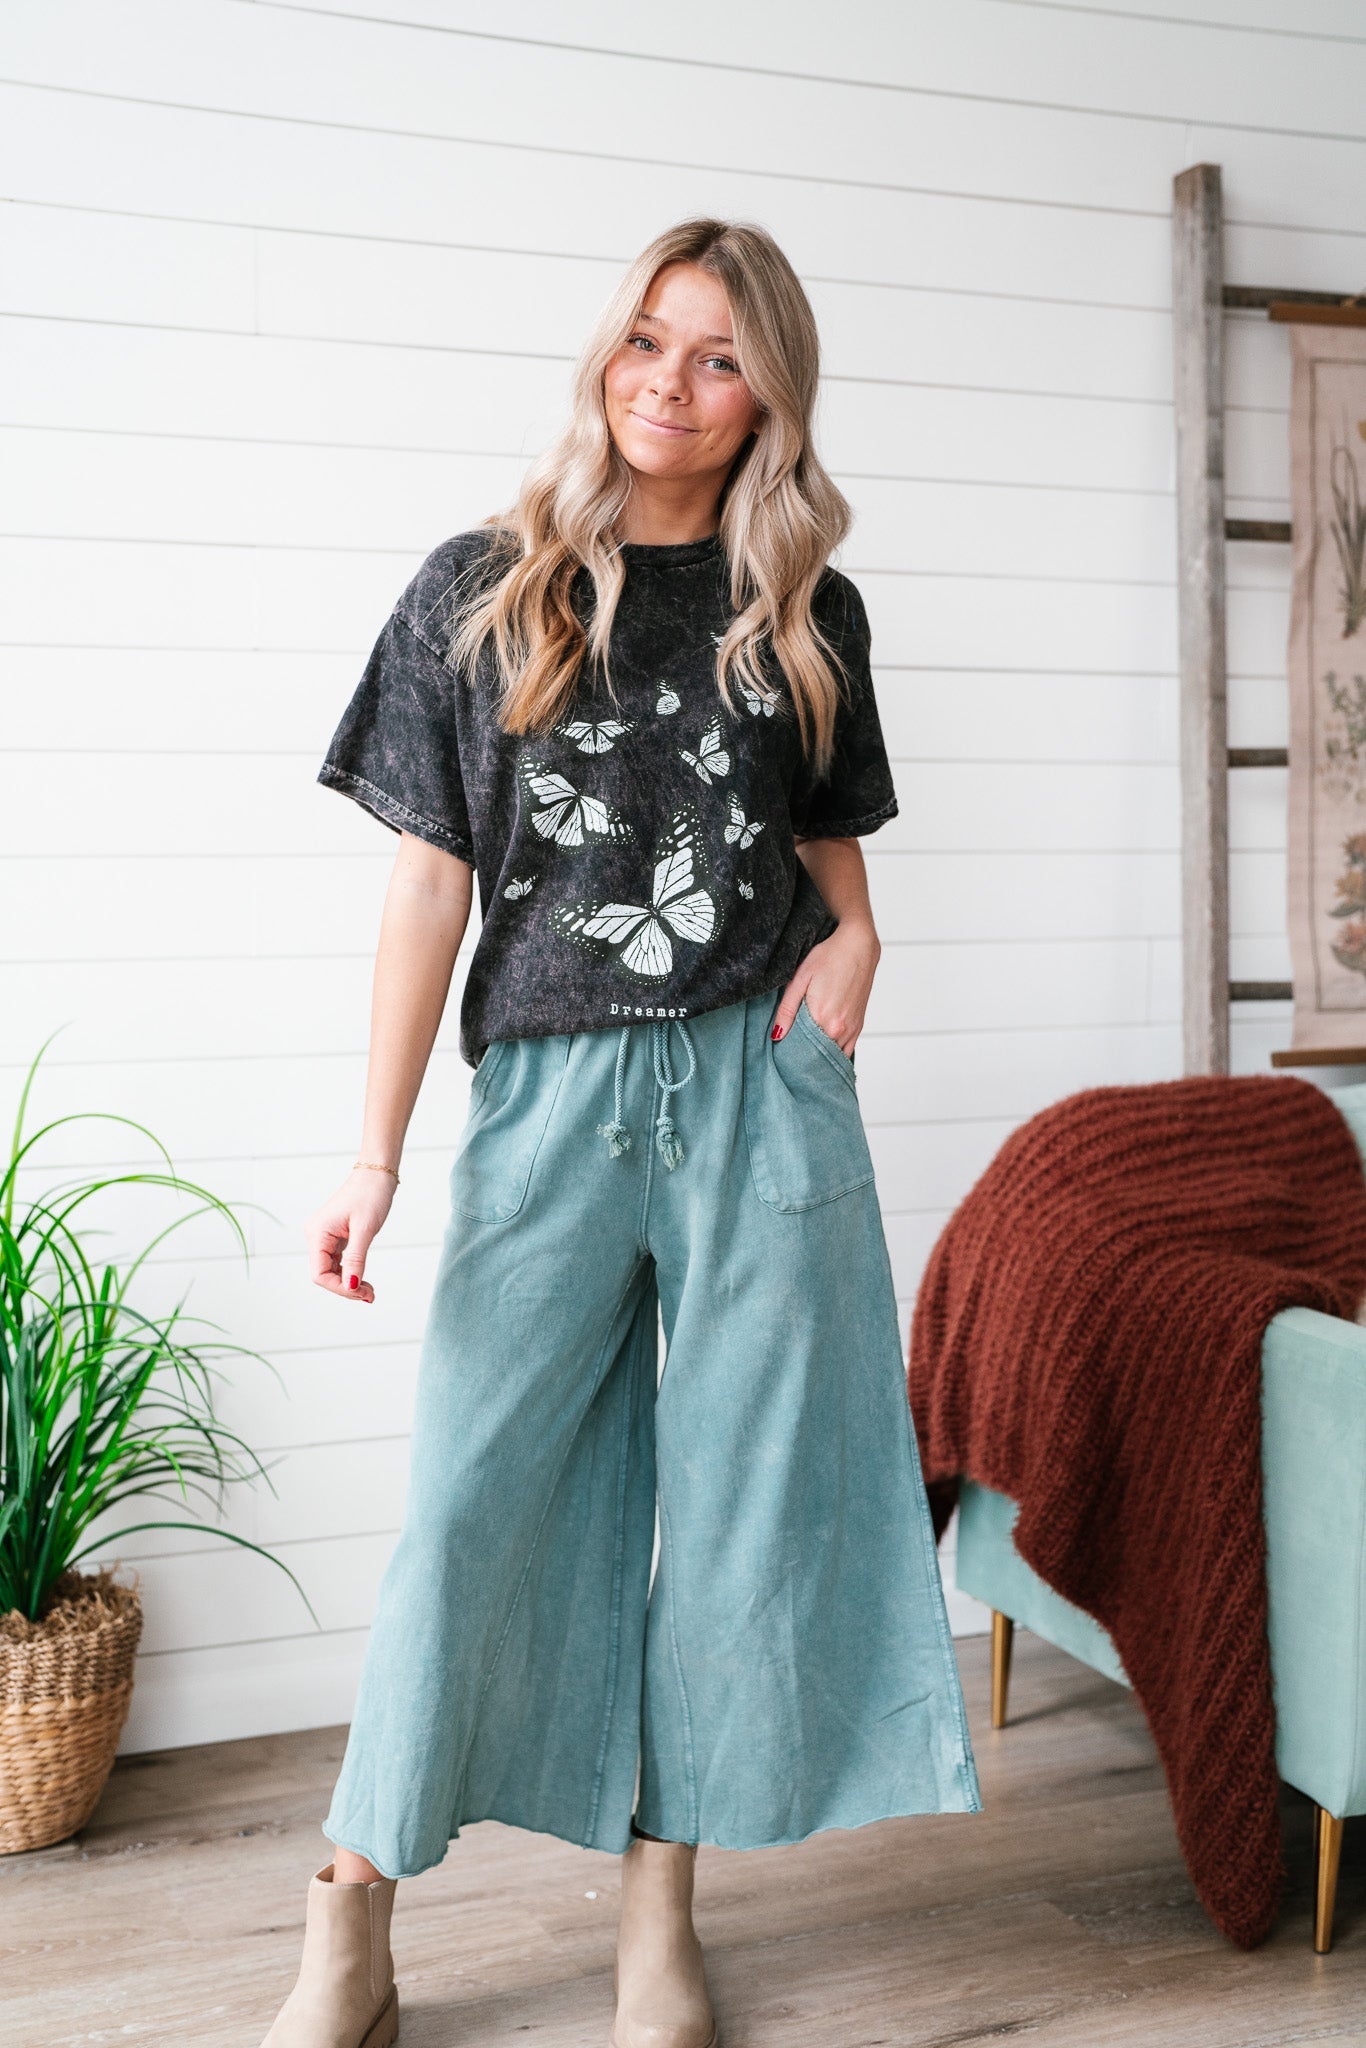 Can't Be Matched Mineral Wash Wide Leg Pants - Teal